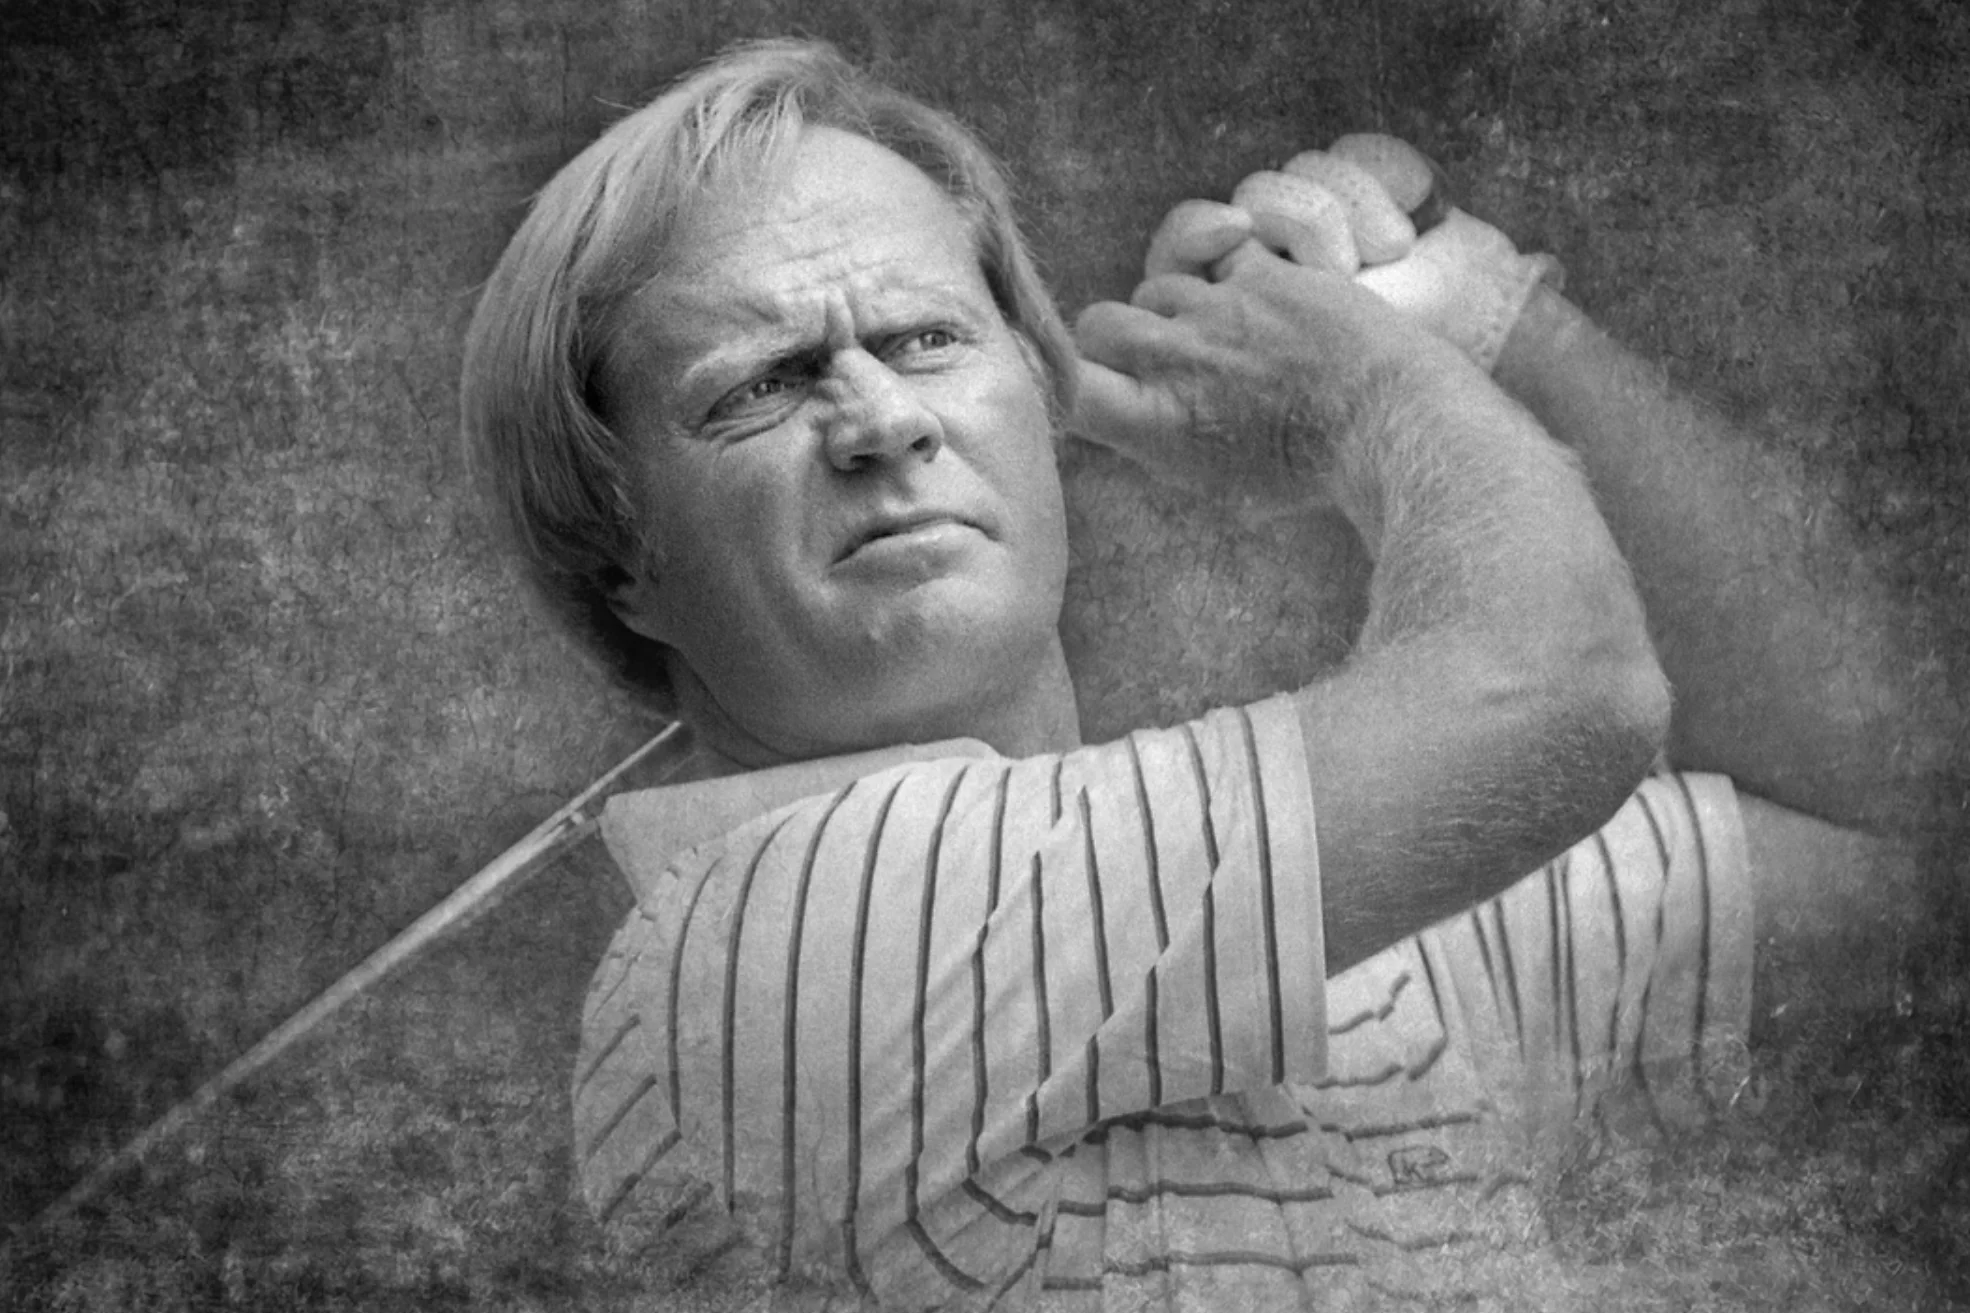 Jack Nicklaus - Limited Edition